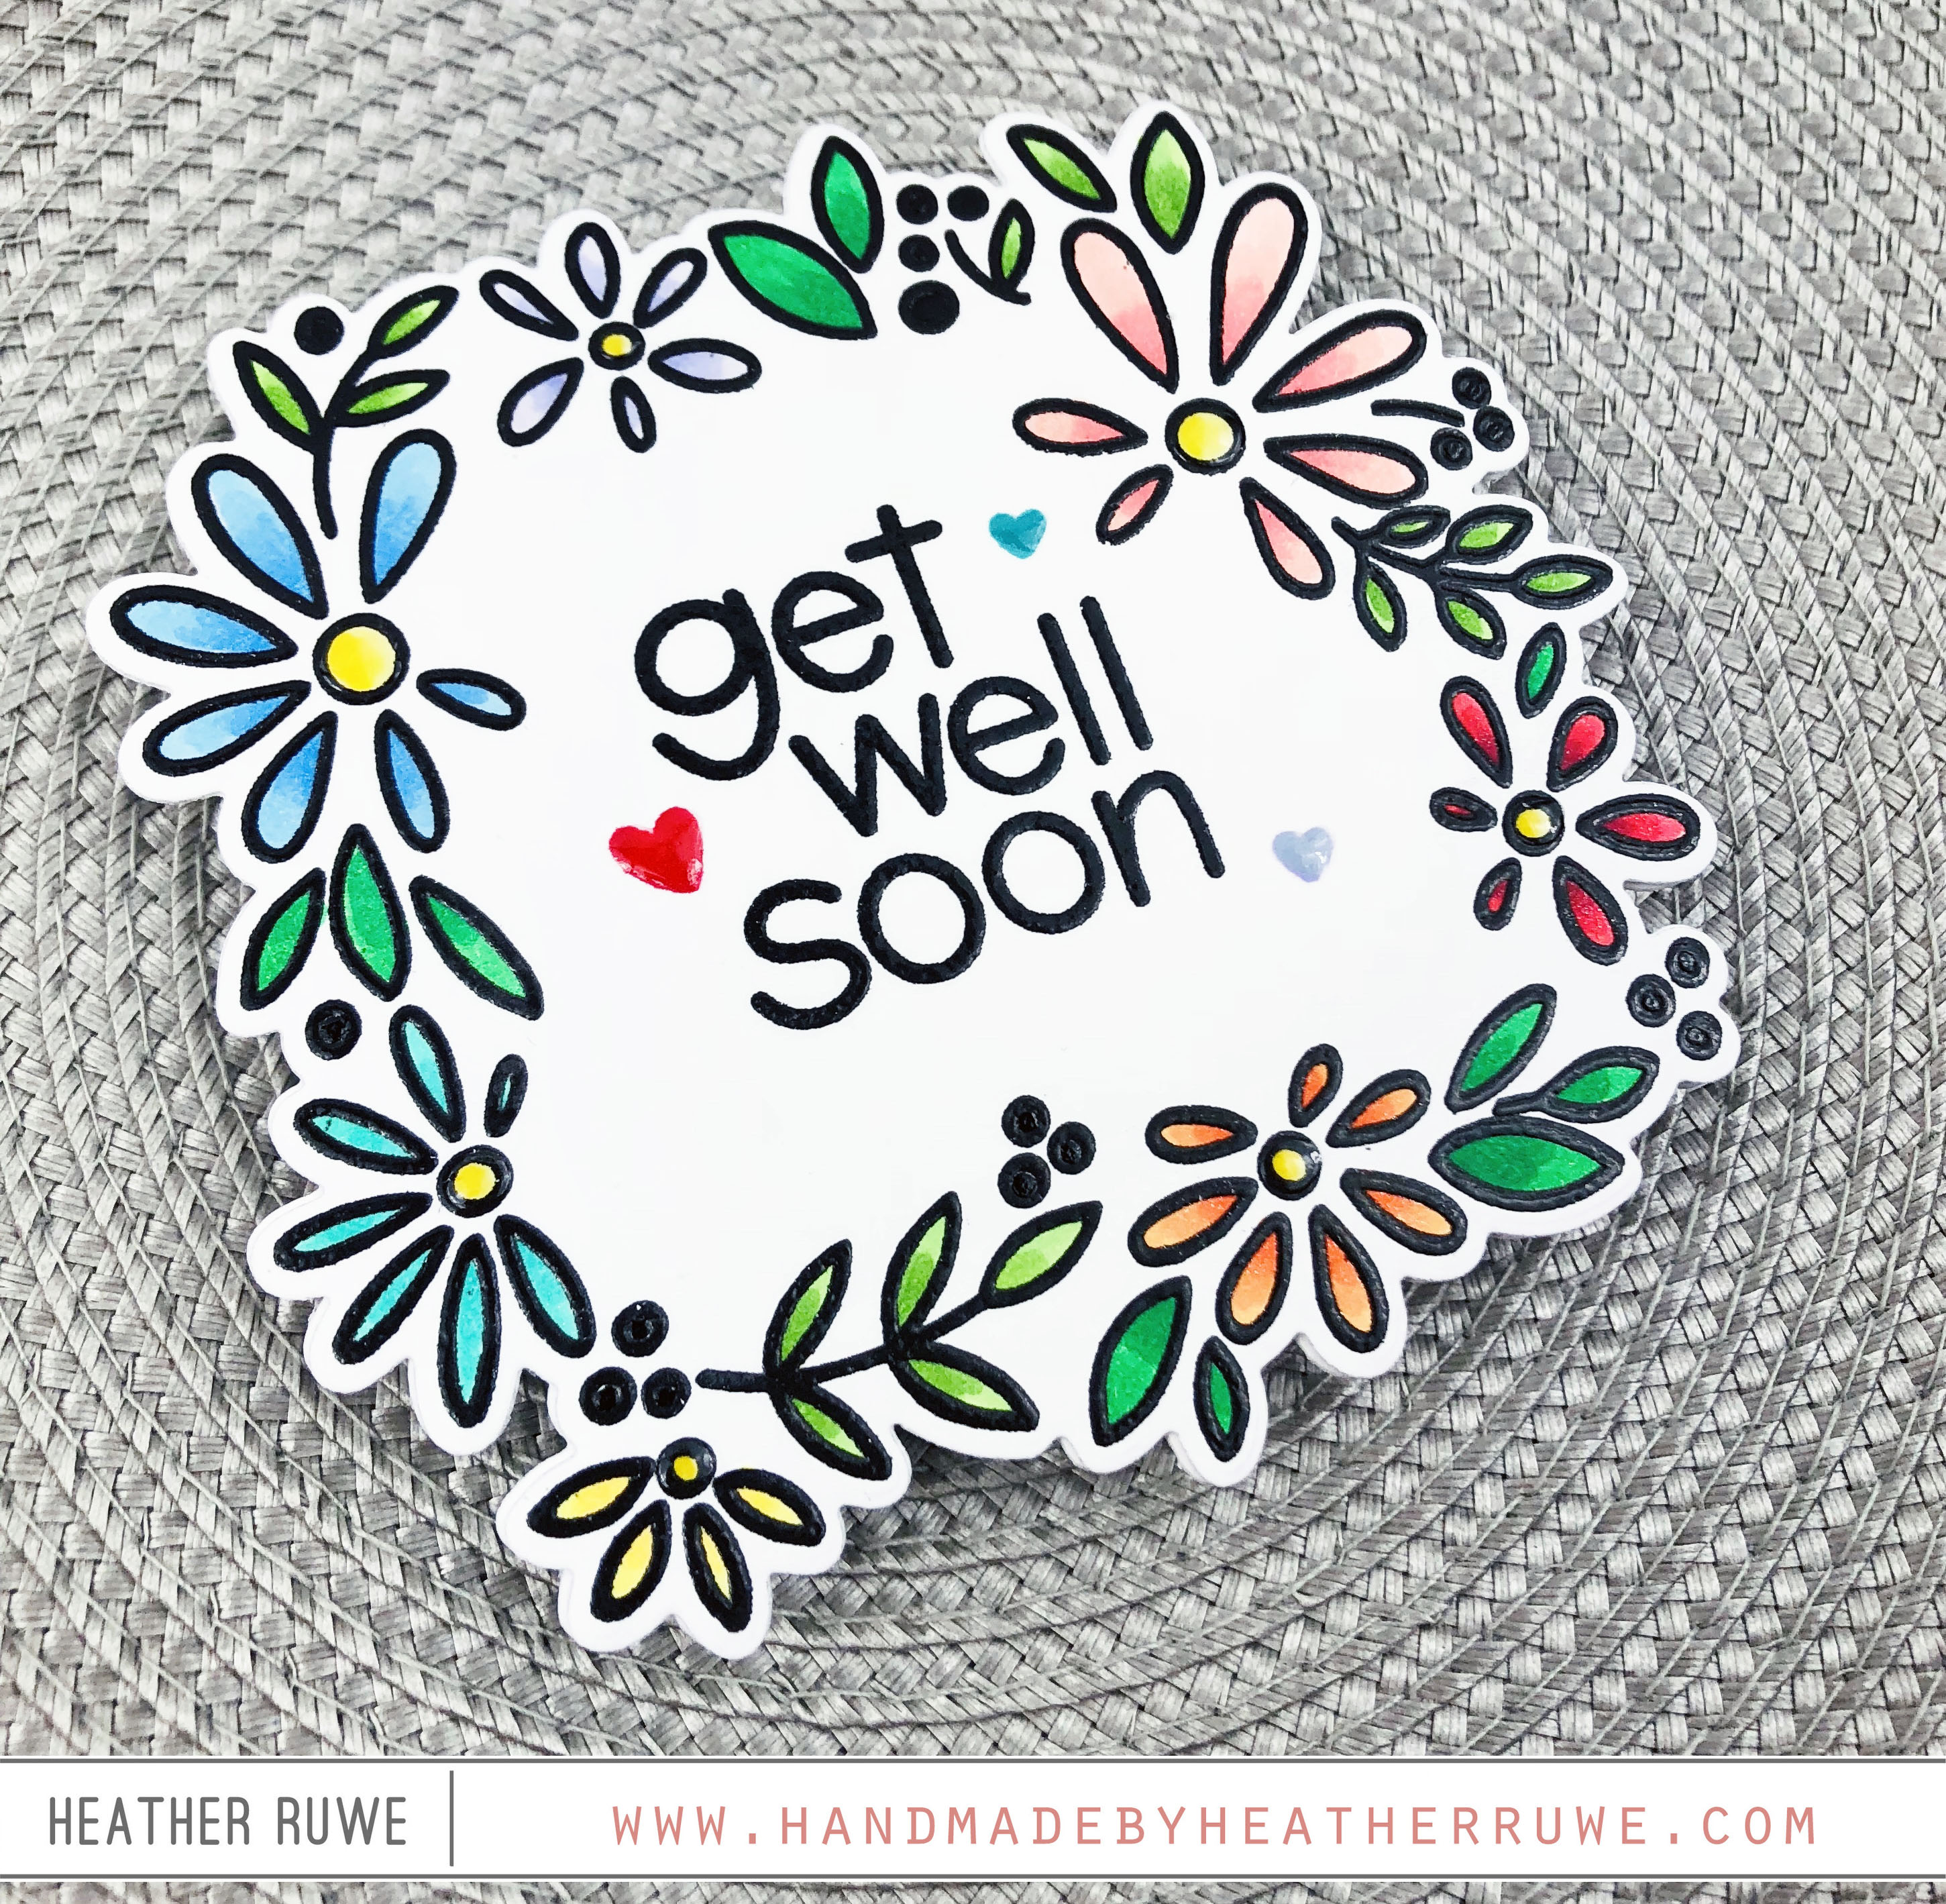 Get Well Card Kit, DIY Get Well Cards, Get Well Cards for Kids, Card  Crafting Kits, Make Your Own Cards, Card Making Kit, Stampin' UP Cards 